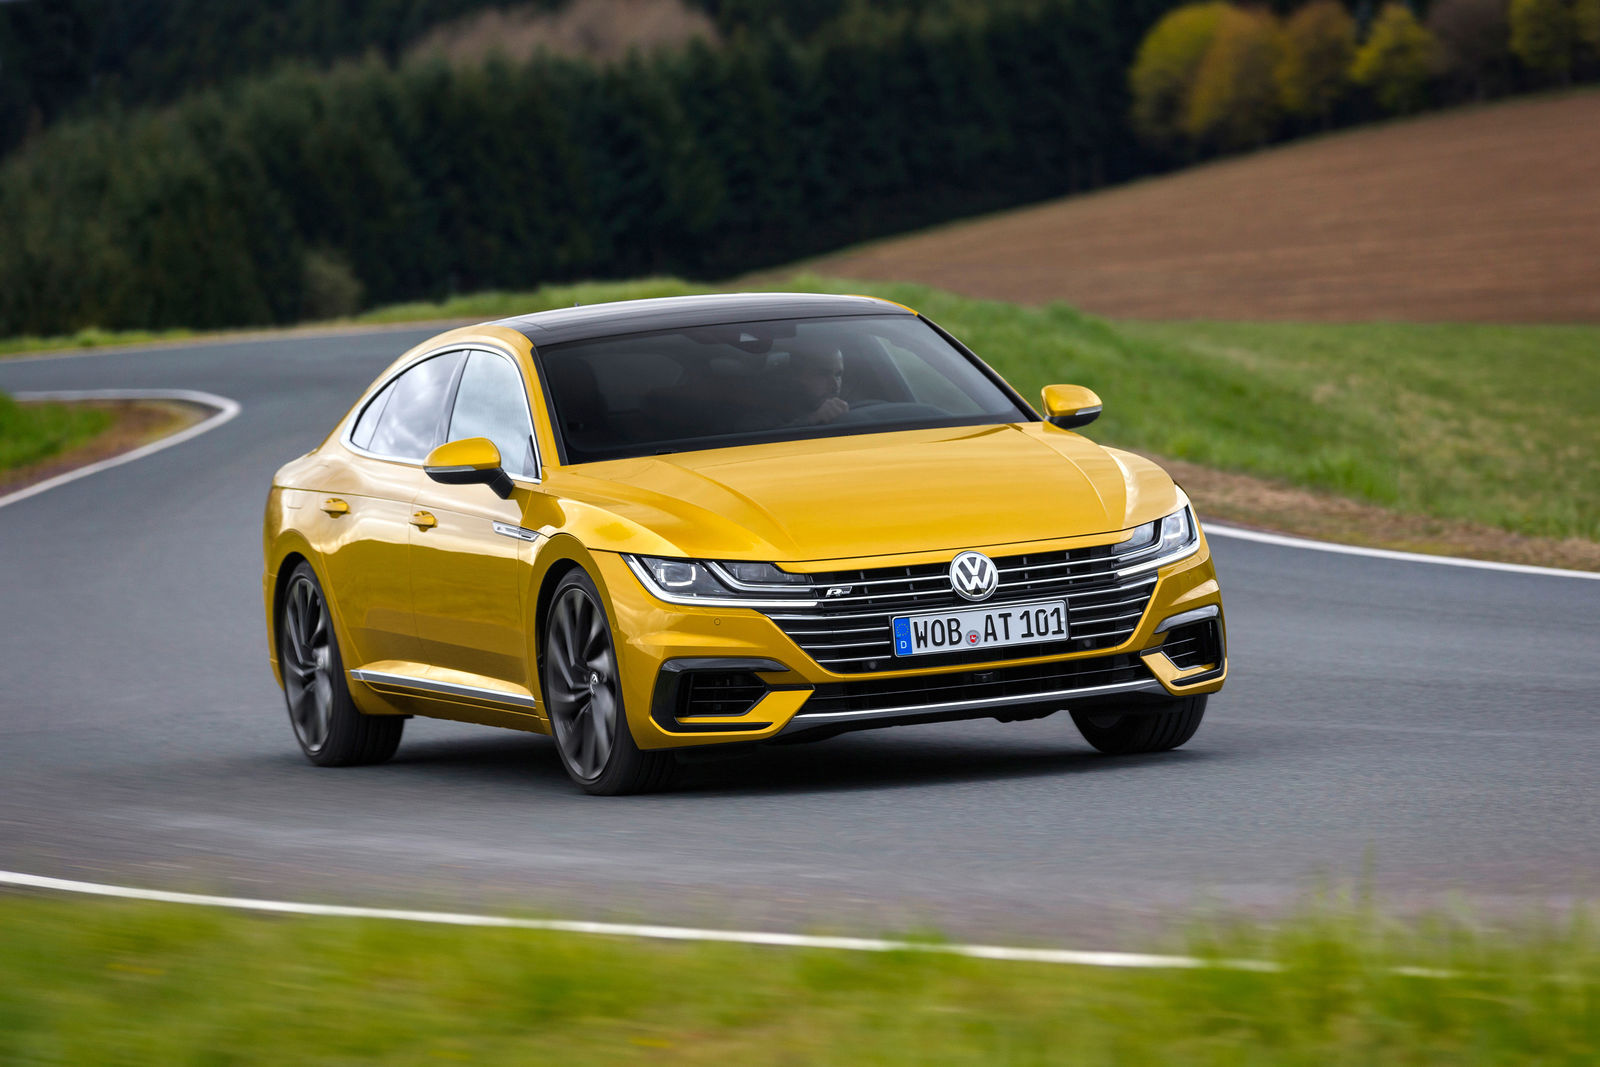 Story: The assistance systems of the new Arteon - Interactive technologies look ahead for safety